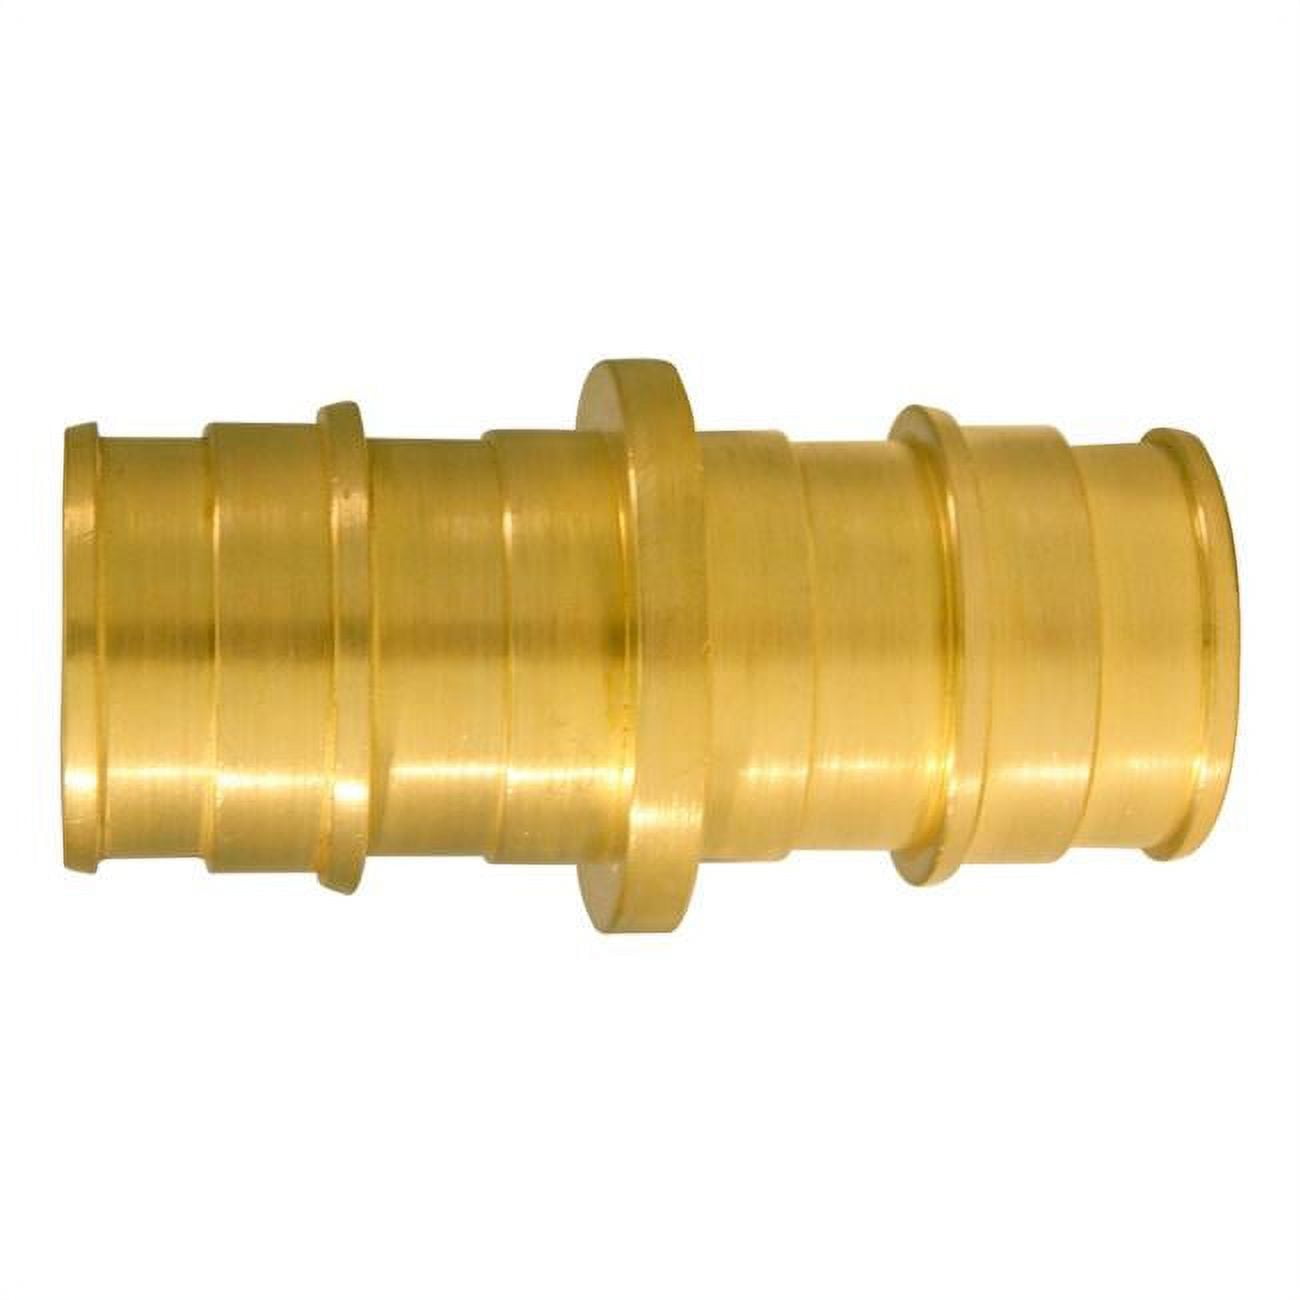 Picture of Apollo 4007401 0.75 x 0.75 in. Barb Brass Straight Coupling - Pack of 50